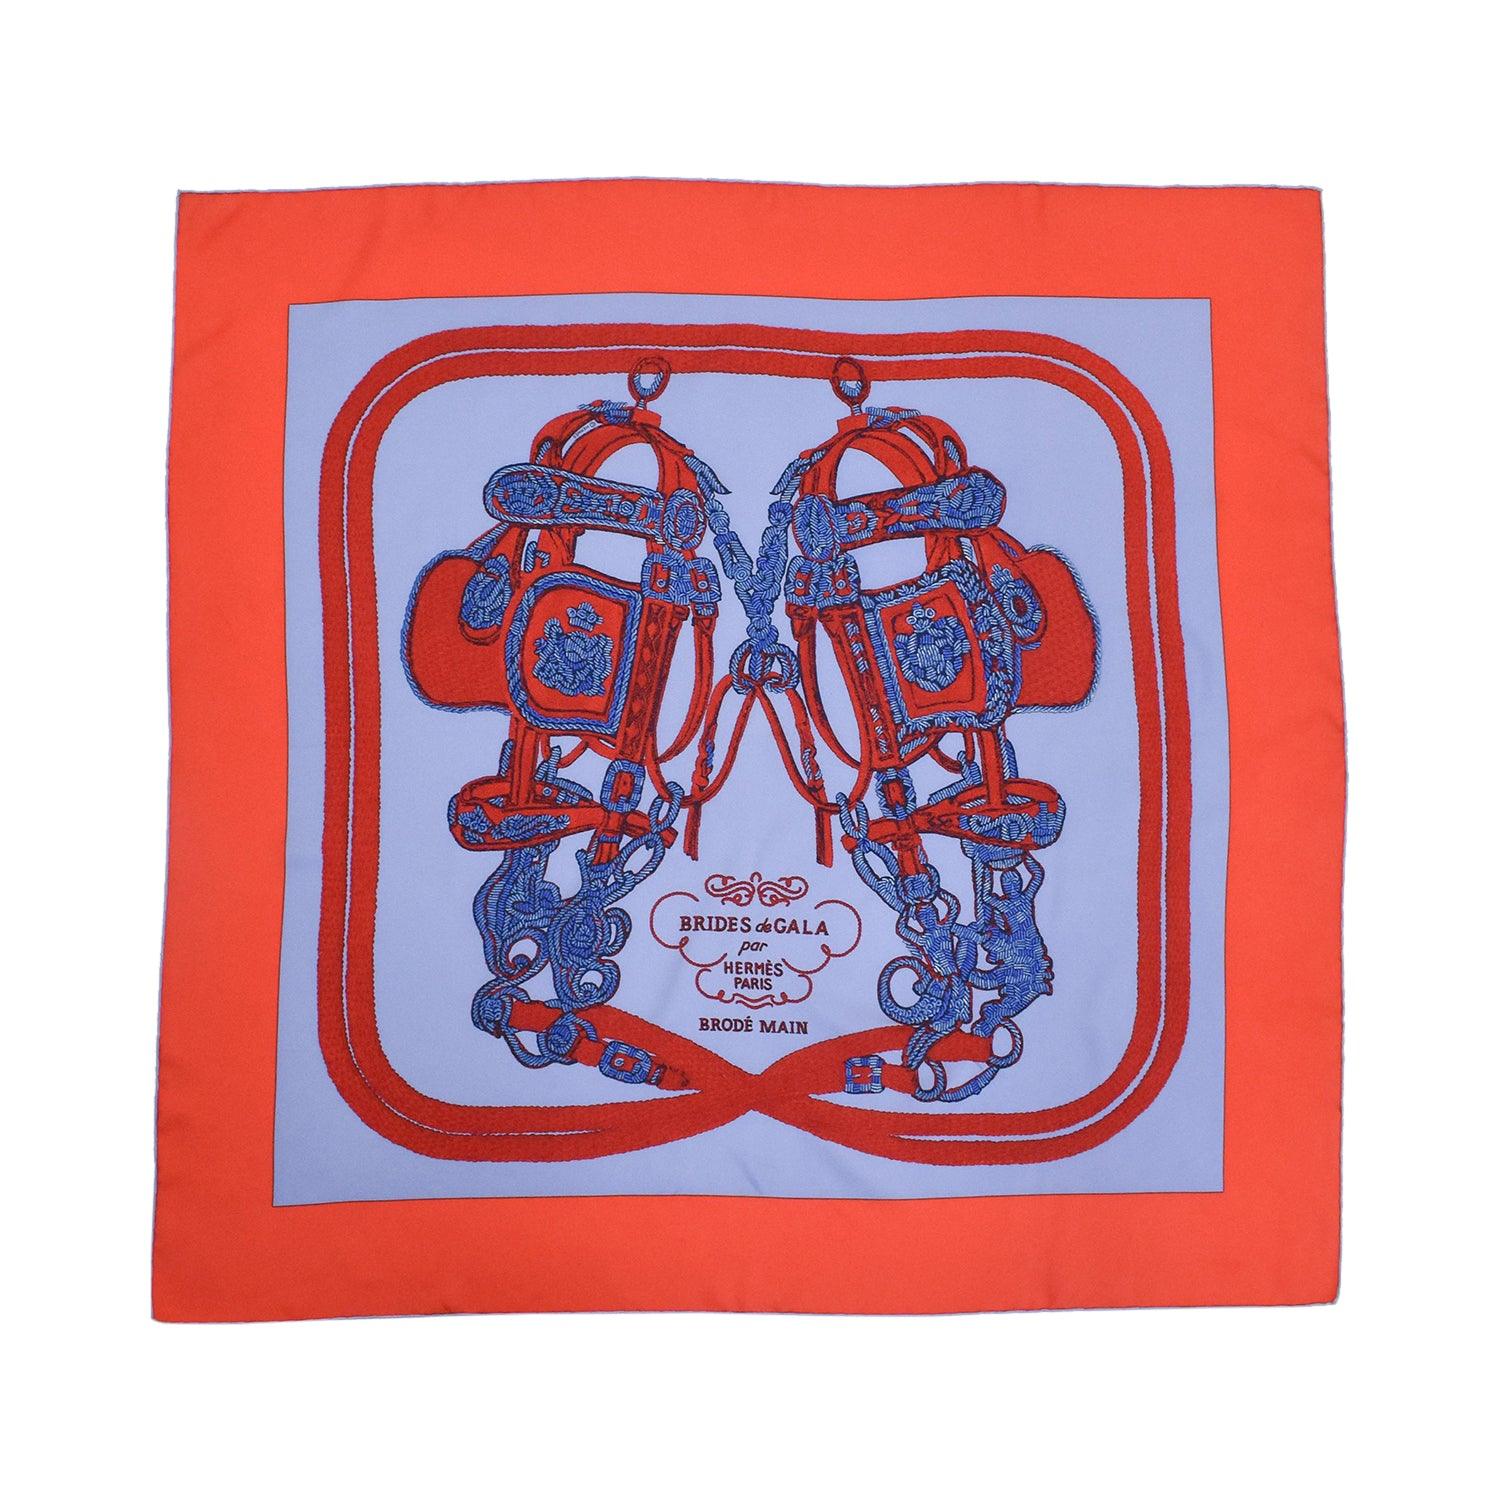 Hermes 'Brides de Gala' Scarf - Fashionably Yours